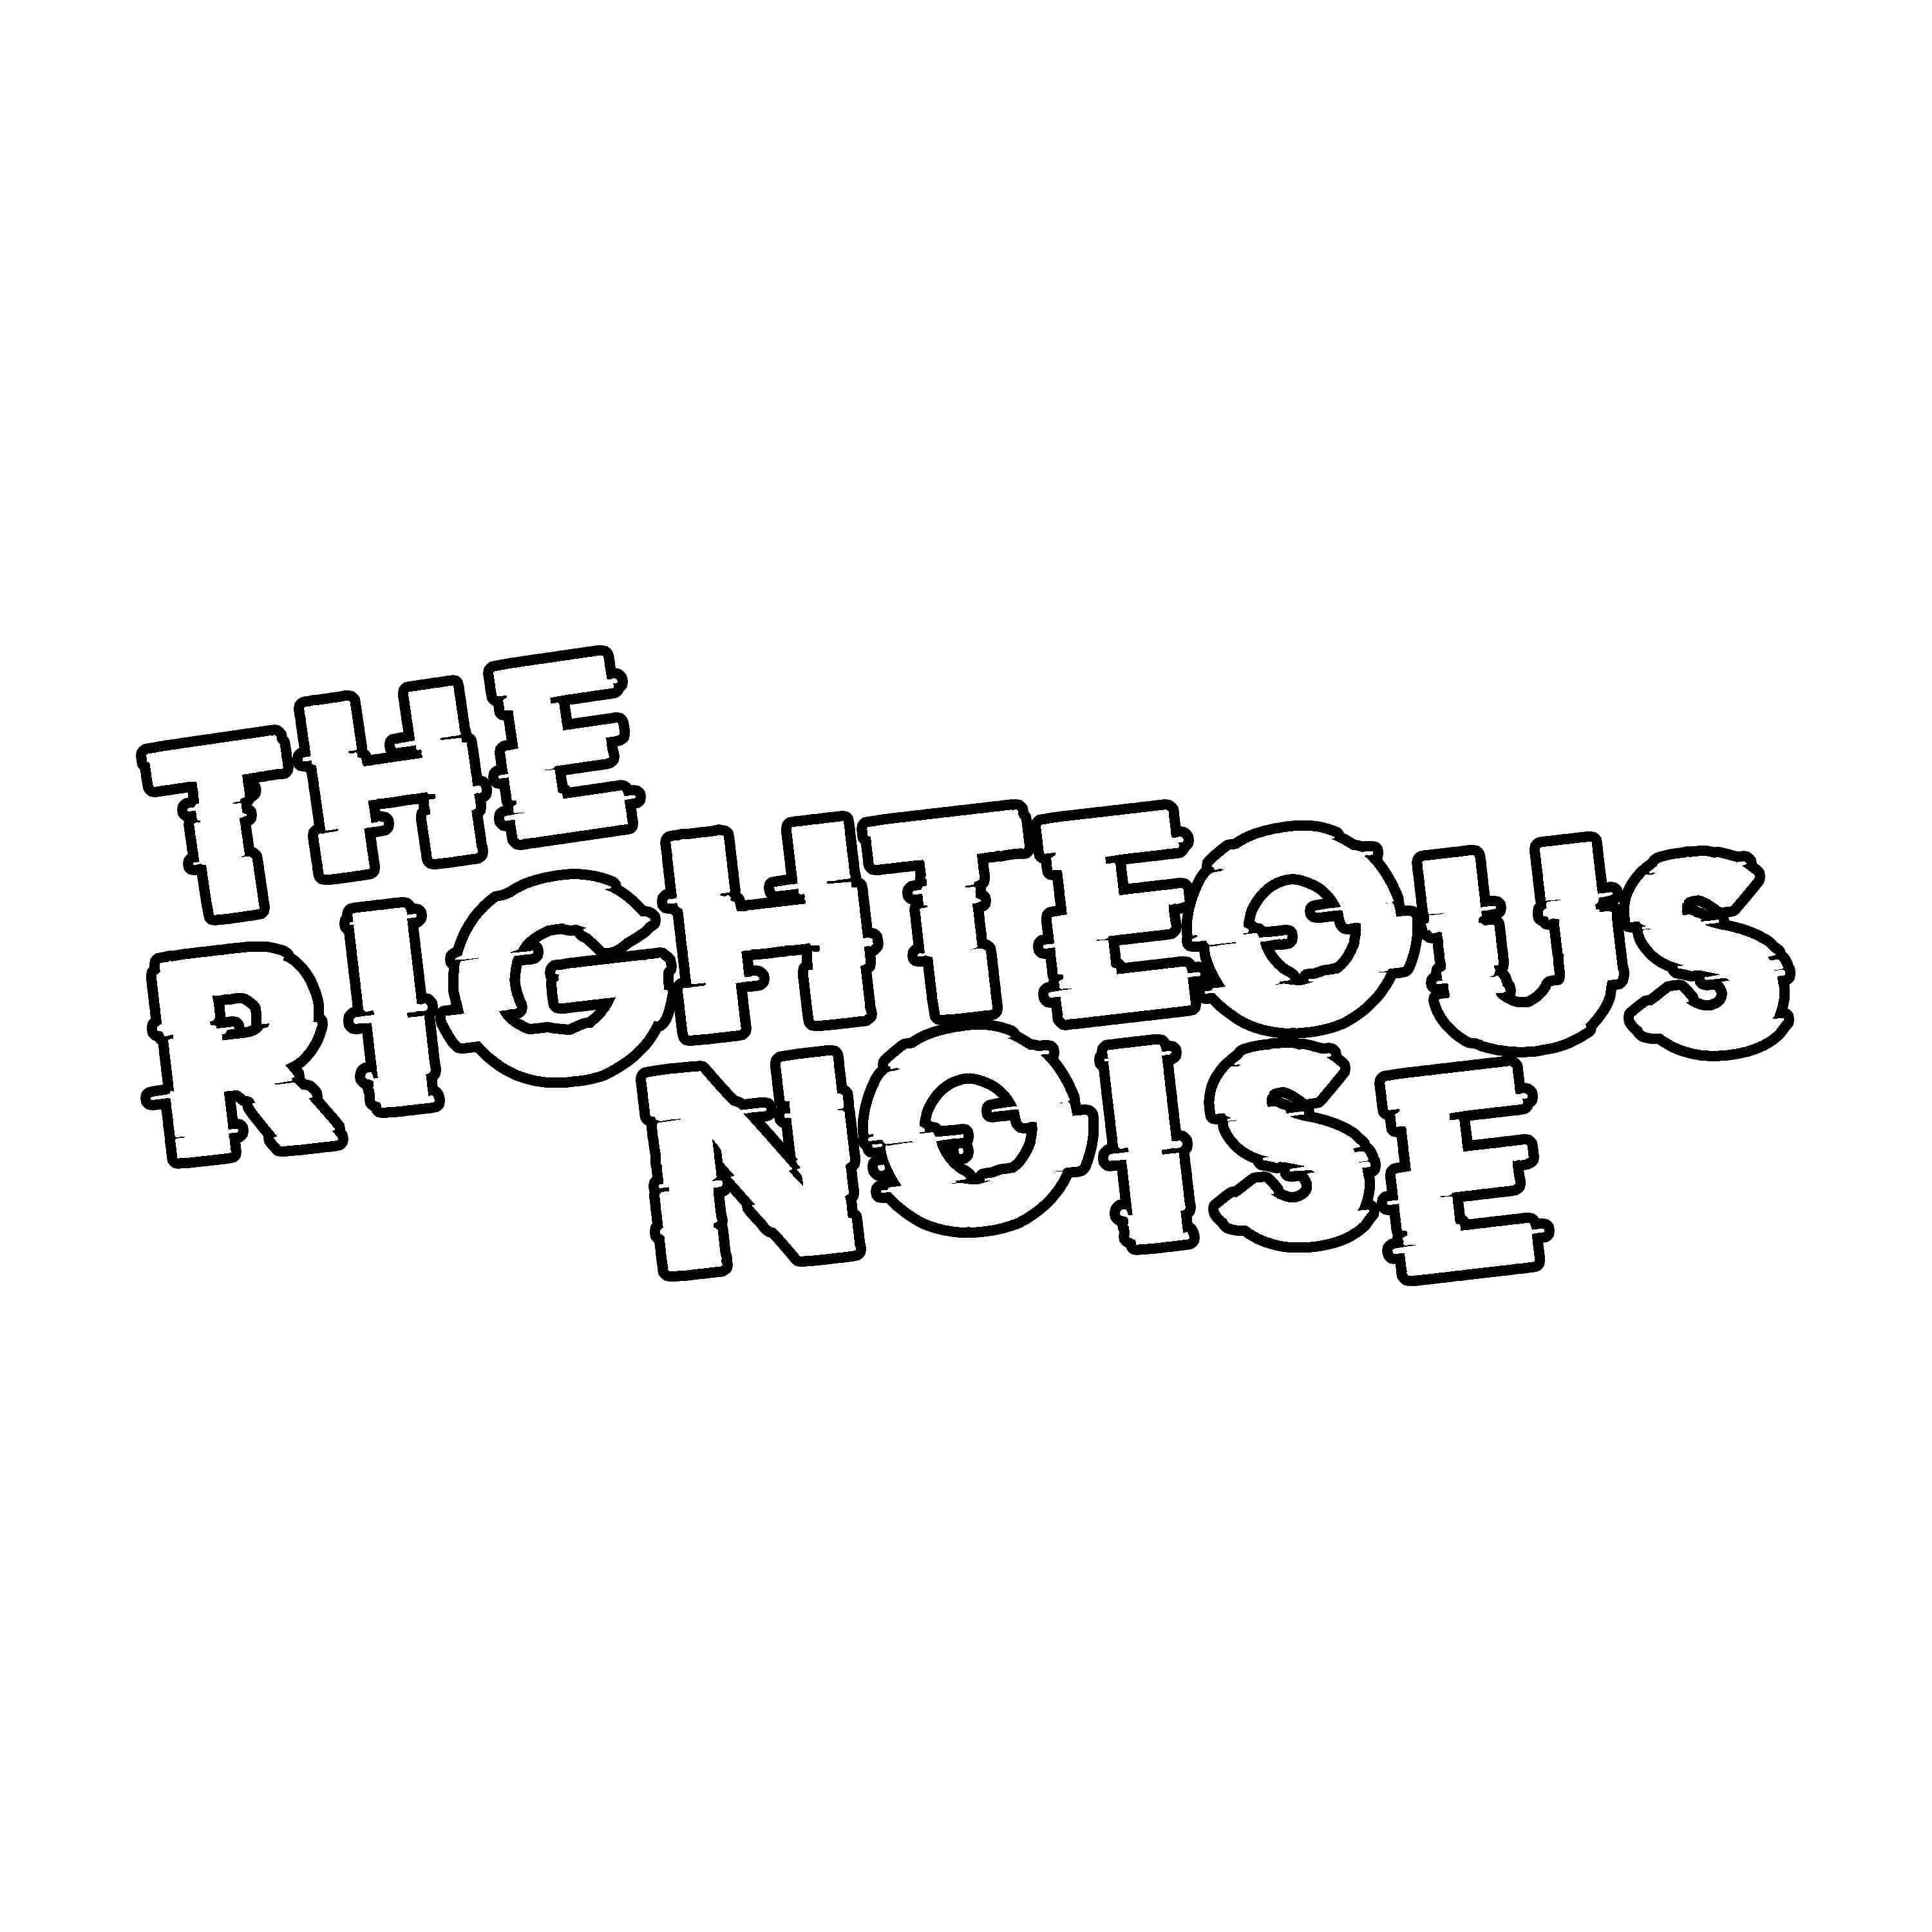 The Righteous Noise rock band logo